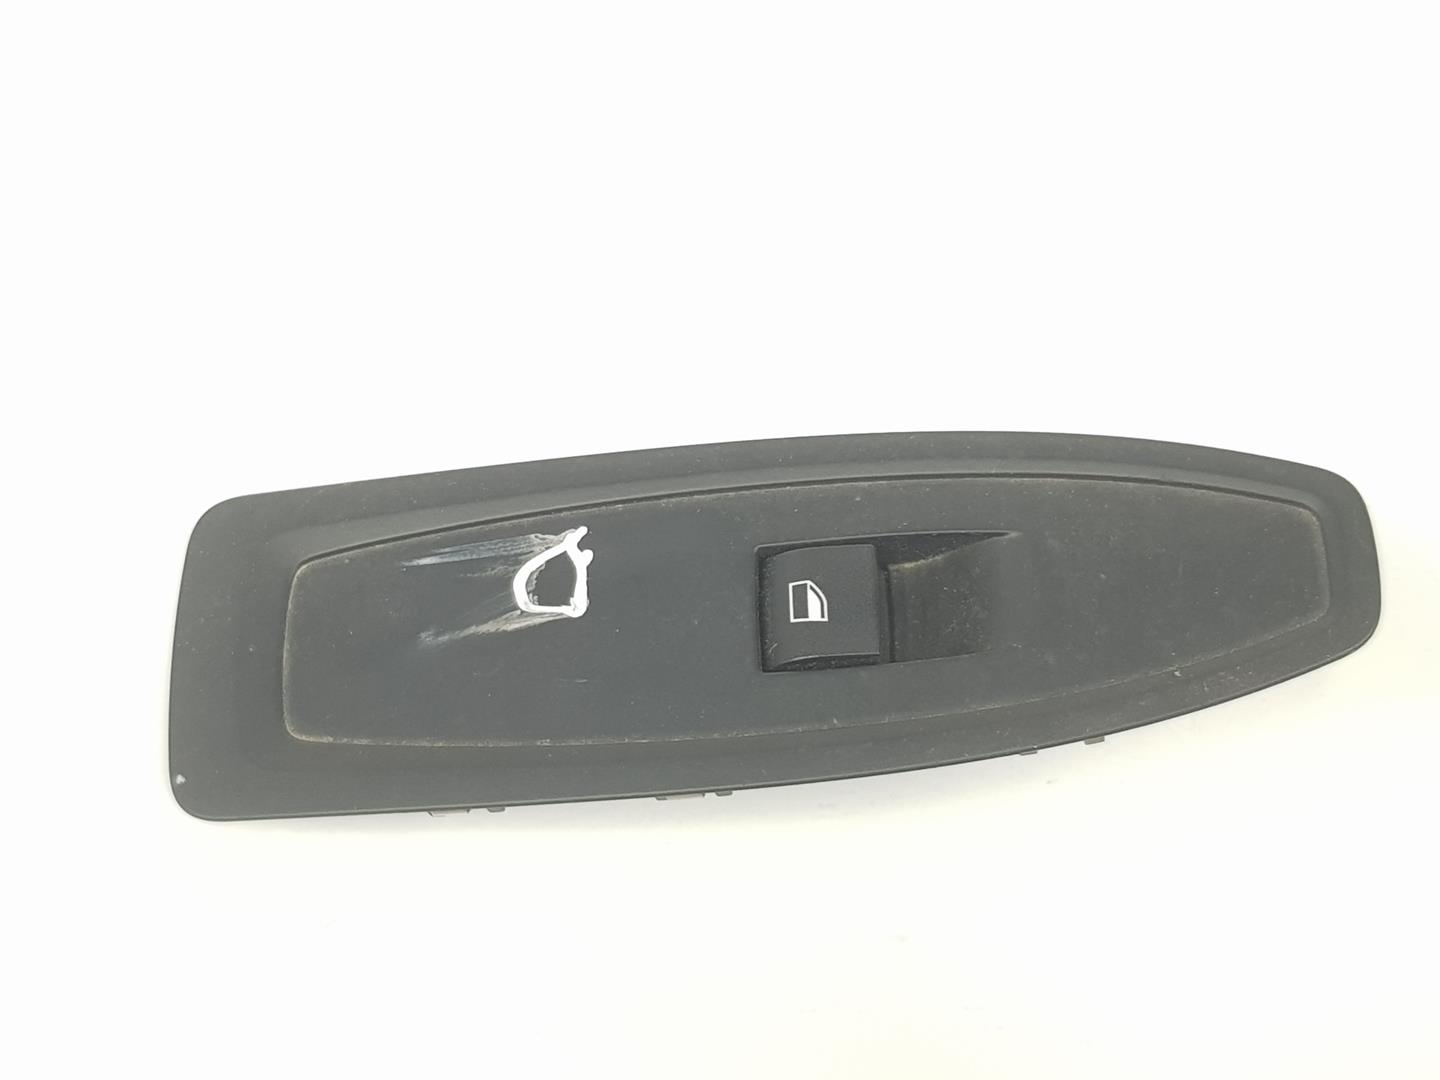 BMW 2 Series F22/F23 (2013-2020) Front Right Door Window Switch 61319208107, 61319208107 19850116